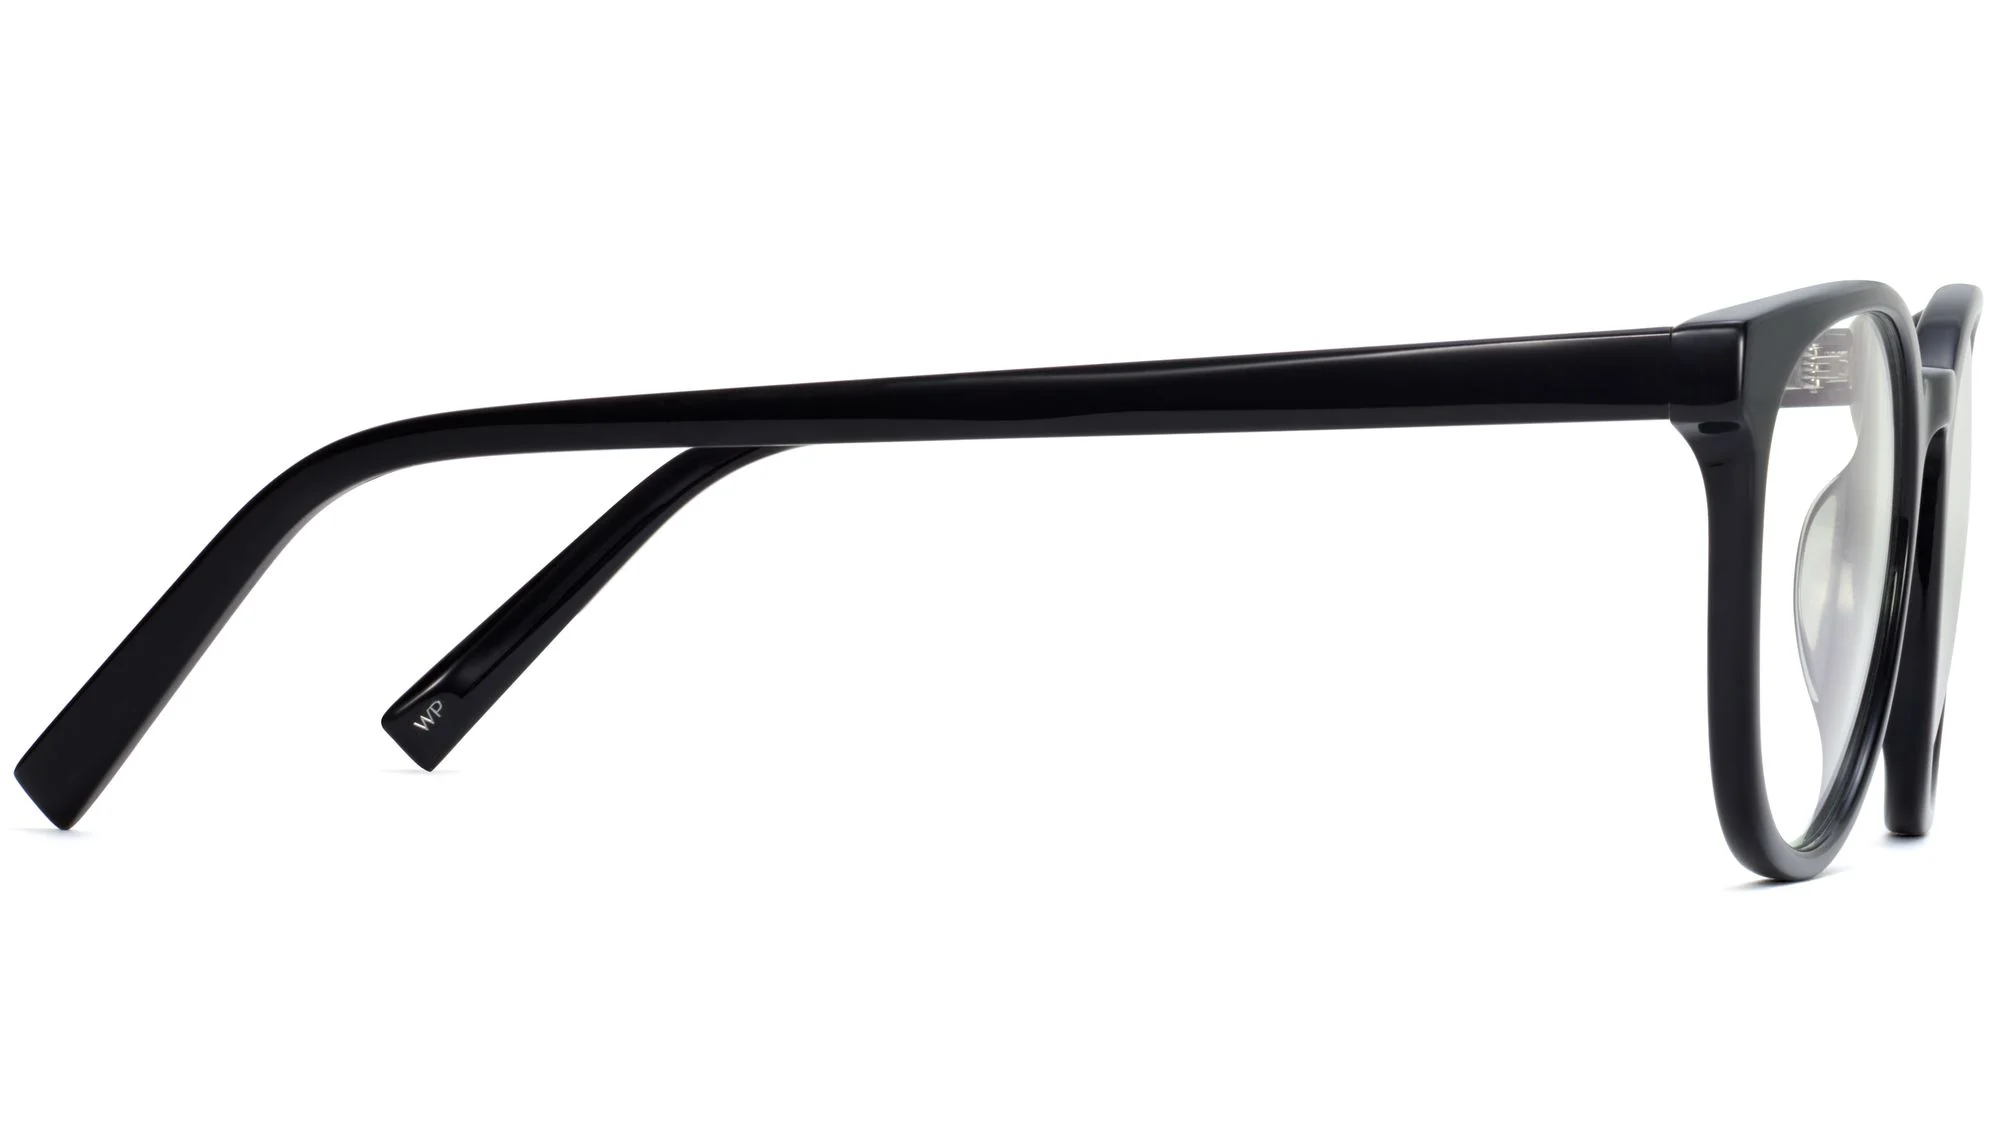 Side View Image of Gillian Eyeglasses Collection, by Warby Parker Brand, in Jet Black Color